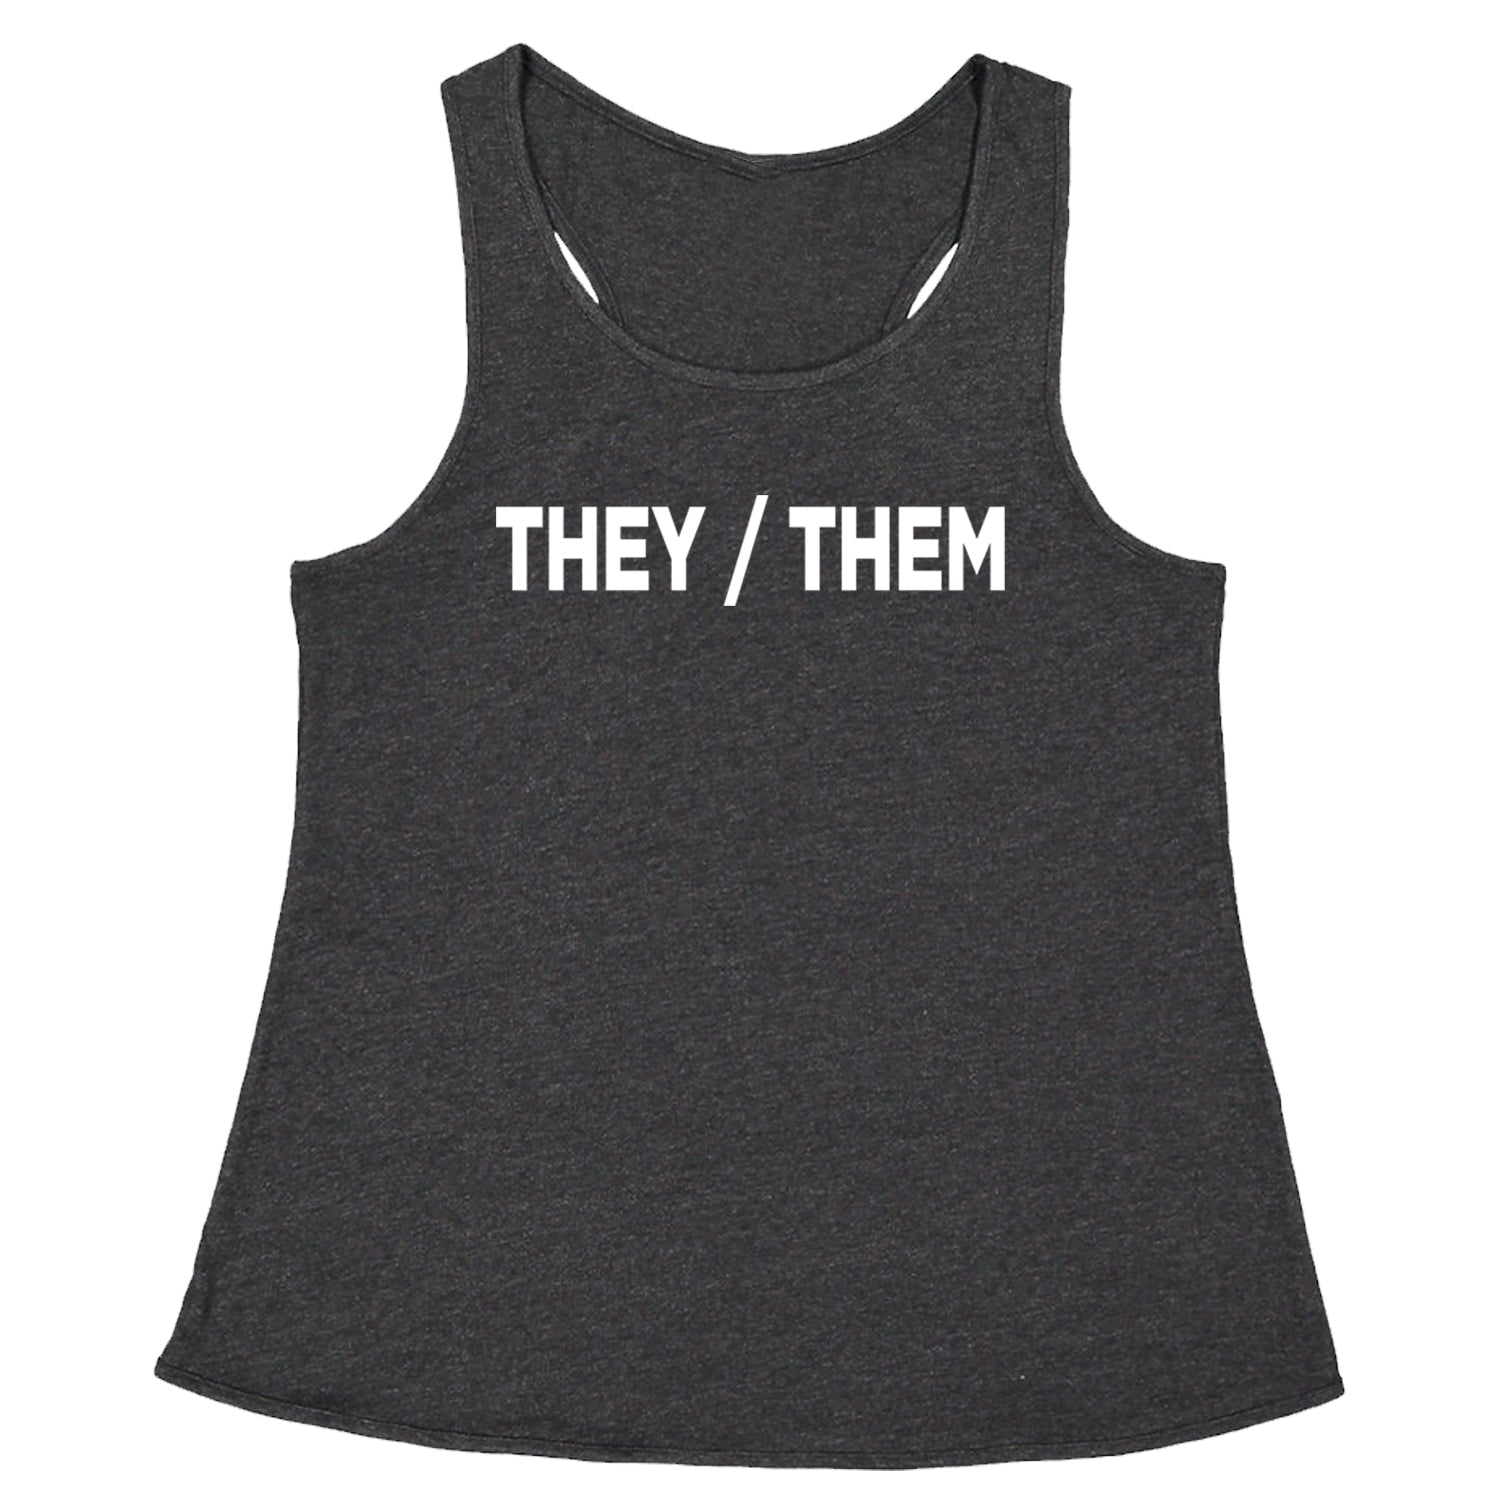 They Them Gender Pronouns Diversity and Inclusion Racerback Tank Top for Women binary, civil, gay, he, her, him, nonbinary, pride, rights, she, them, they by Expression Tees